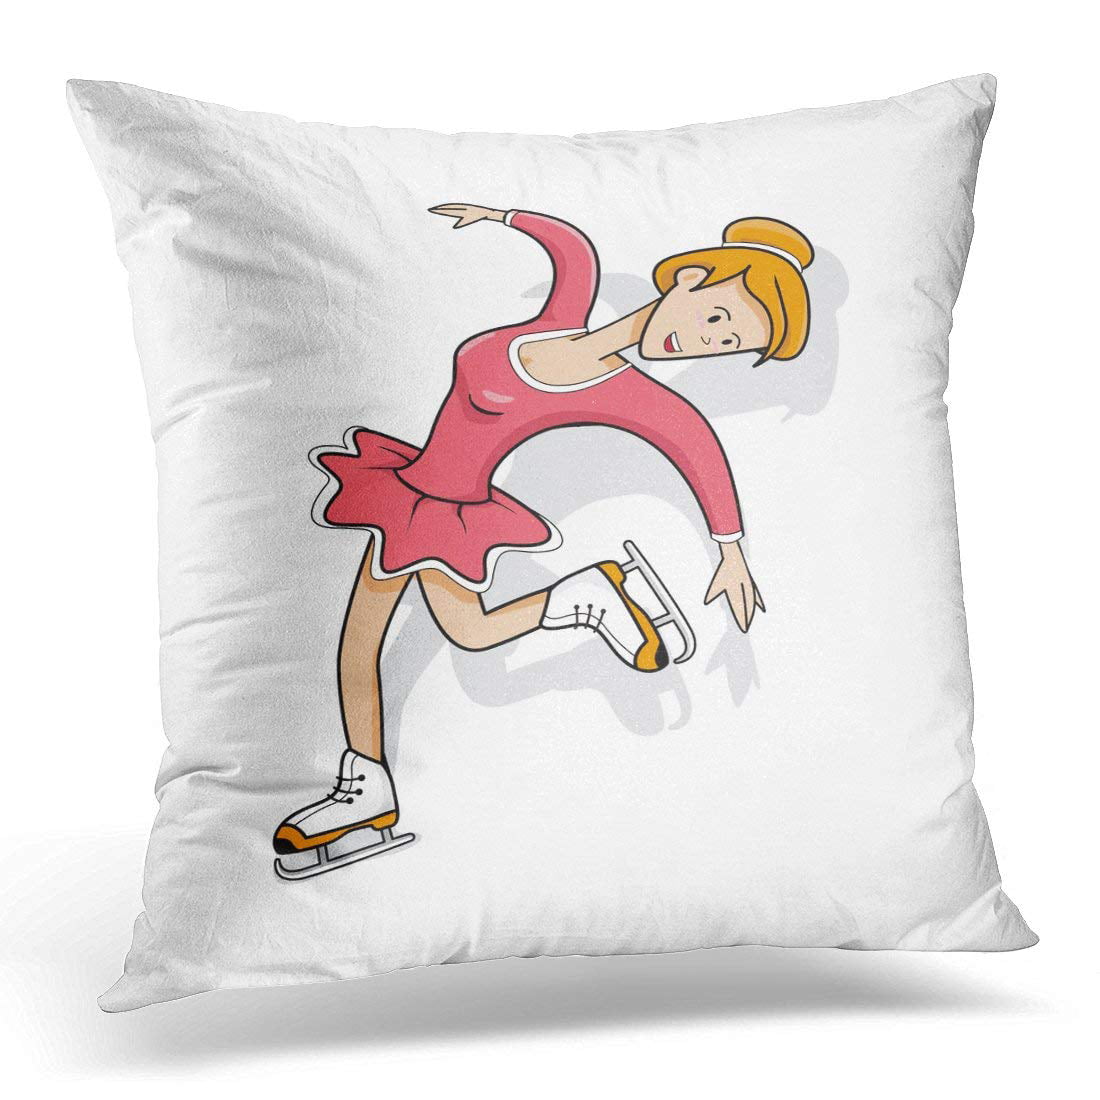 Ice Skating Gifts Colorful Winter Sports Figure Skater Ice Skating Throw Pillow 16x16 Multicolor 